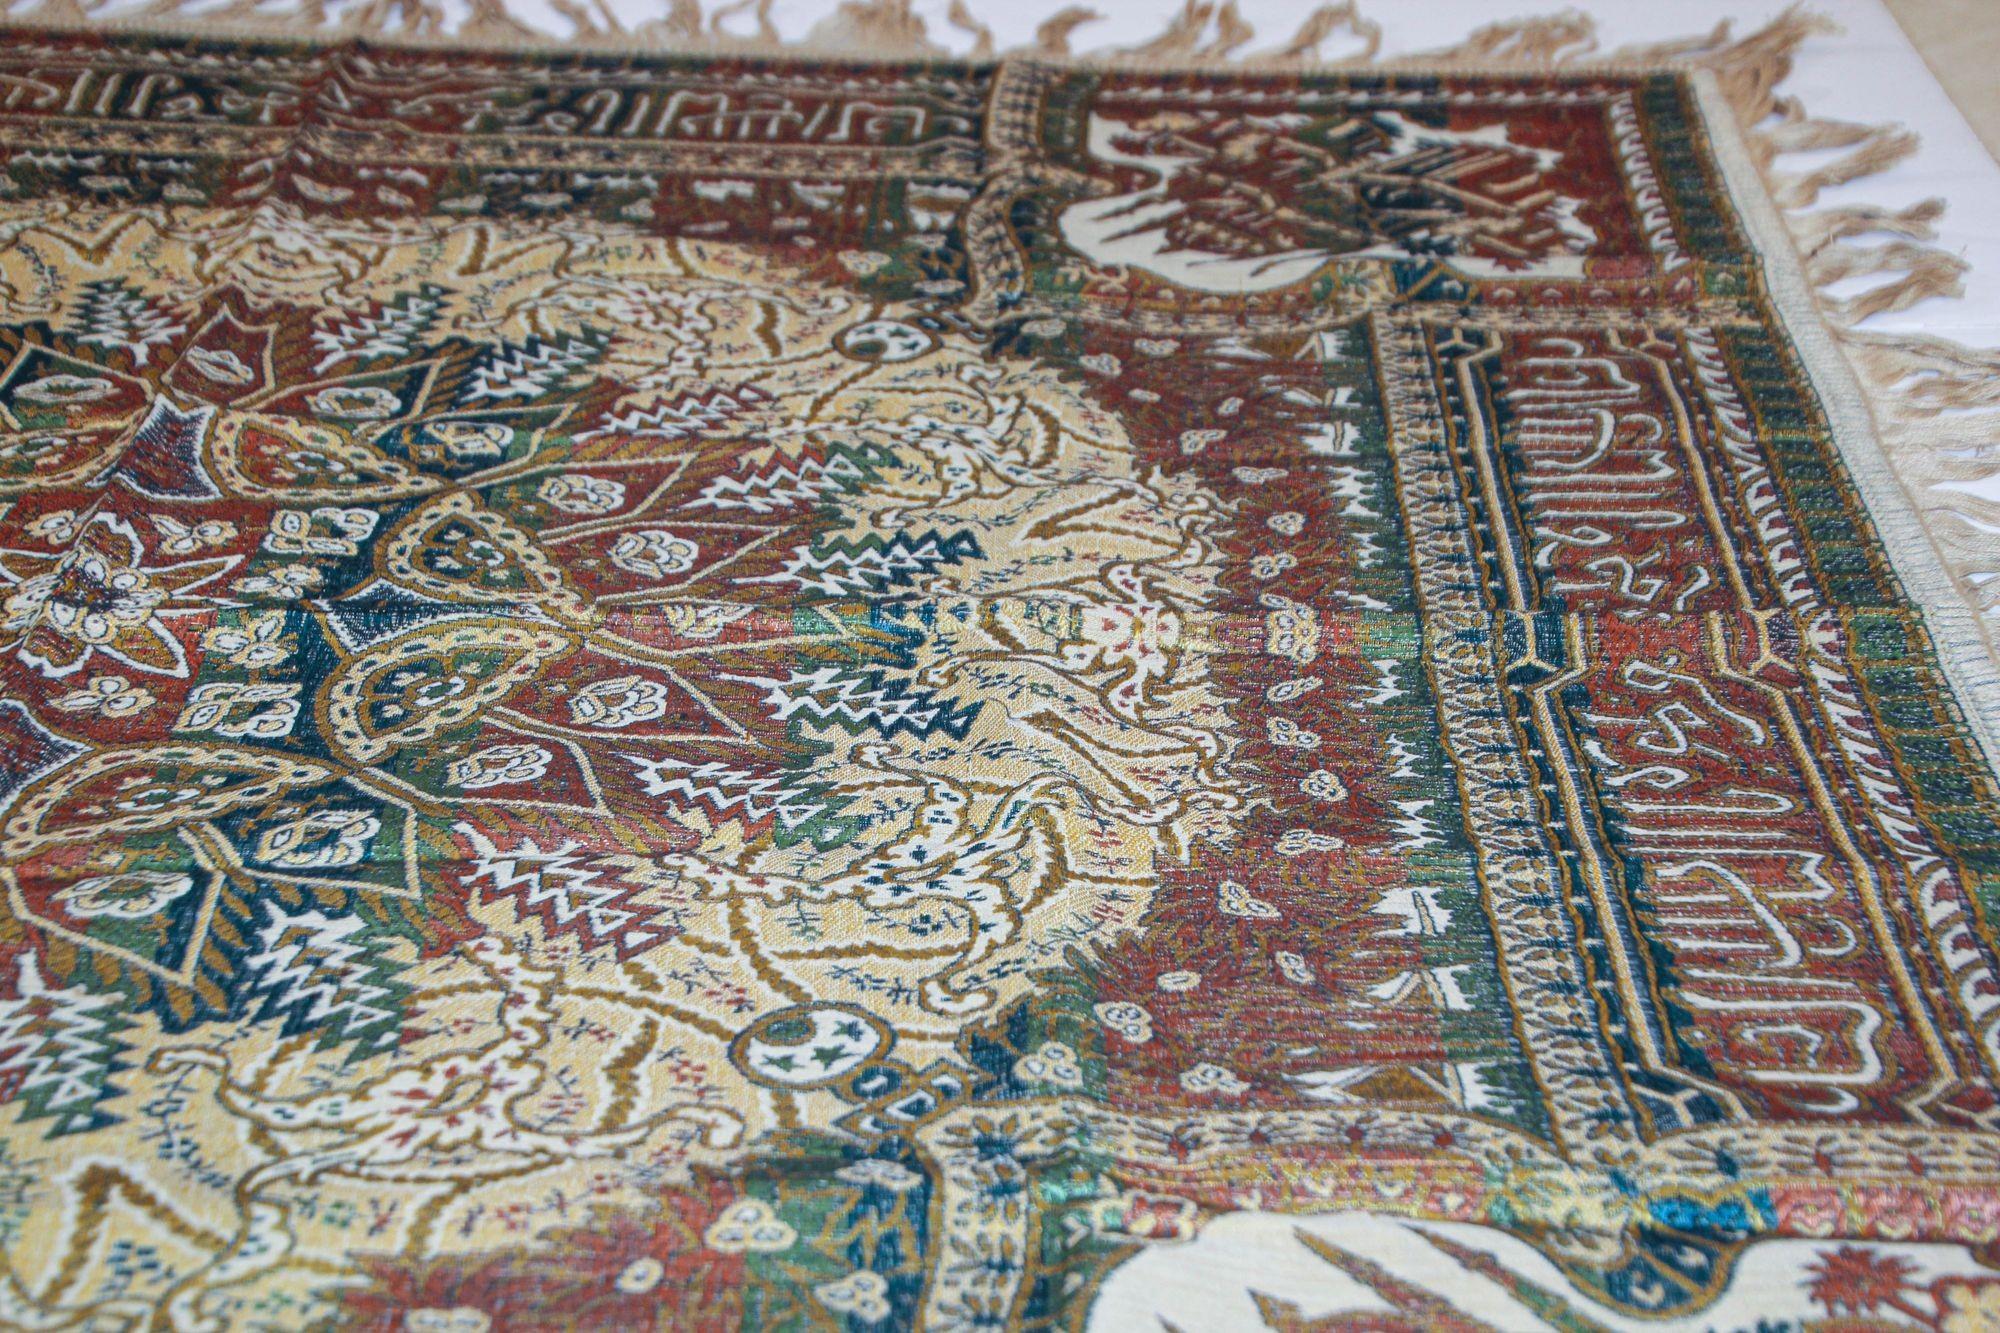 1940s Granada Islamic Spain Textile with Arabic Calligraphy Writing For Sale 8